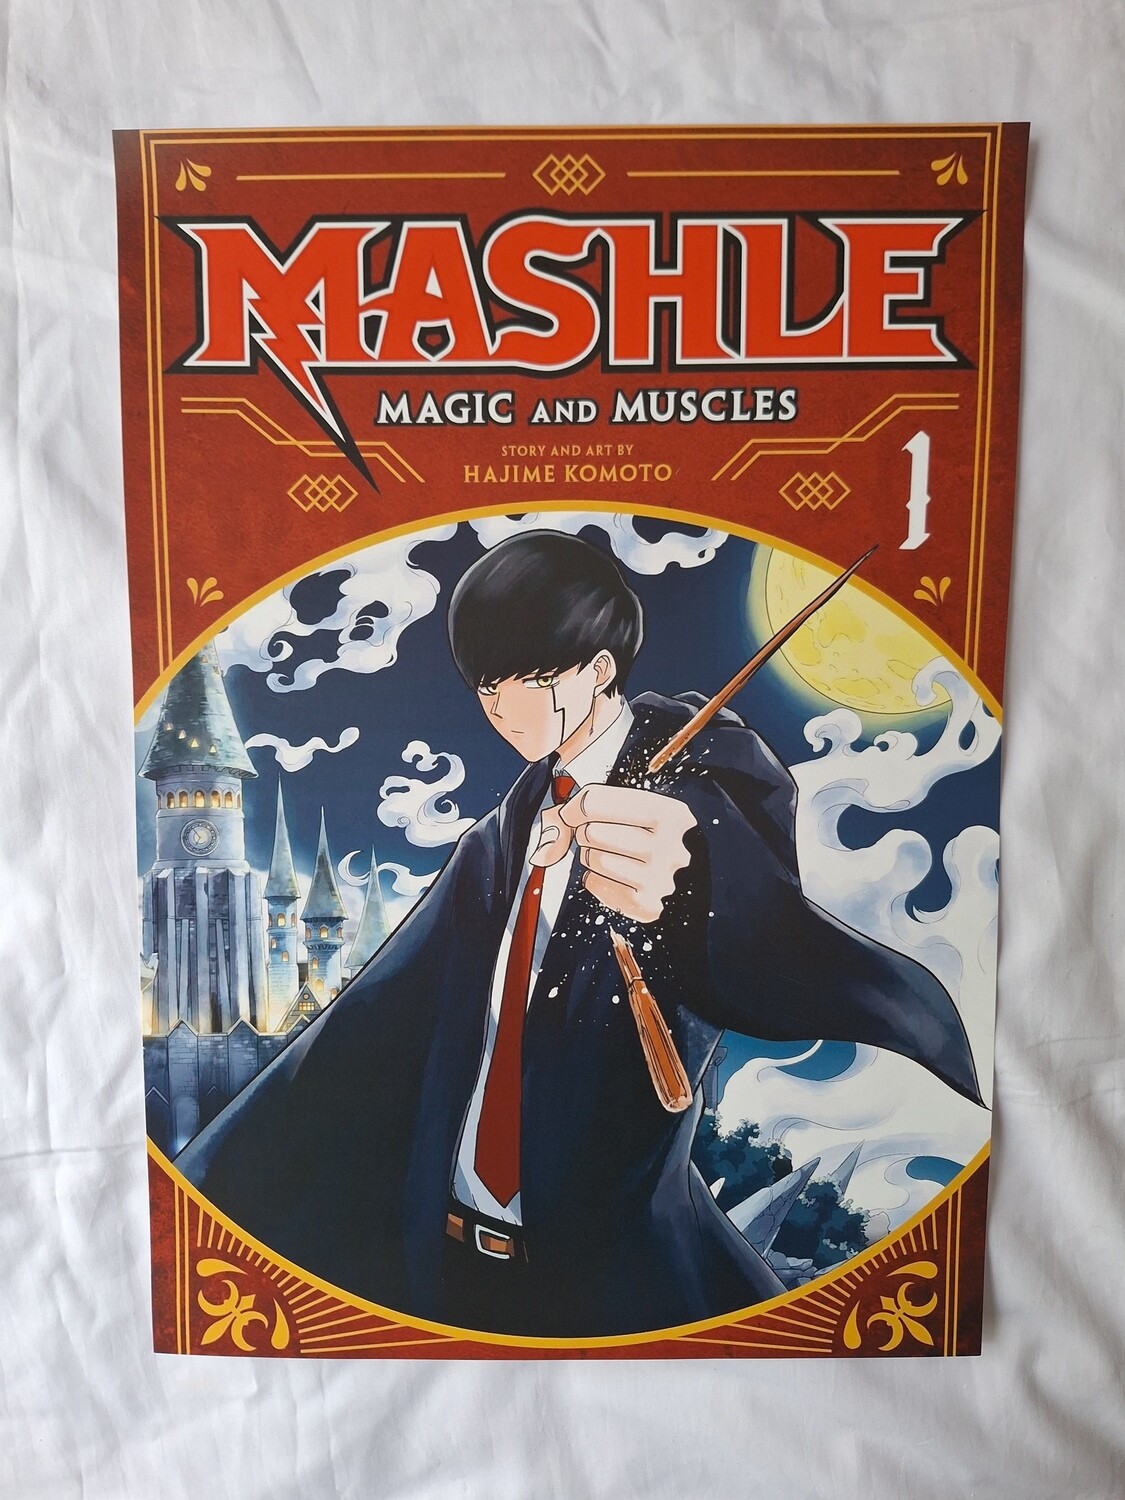 Mashle: Magic and Muscles
A3 Poster.